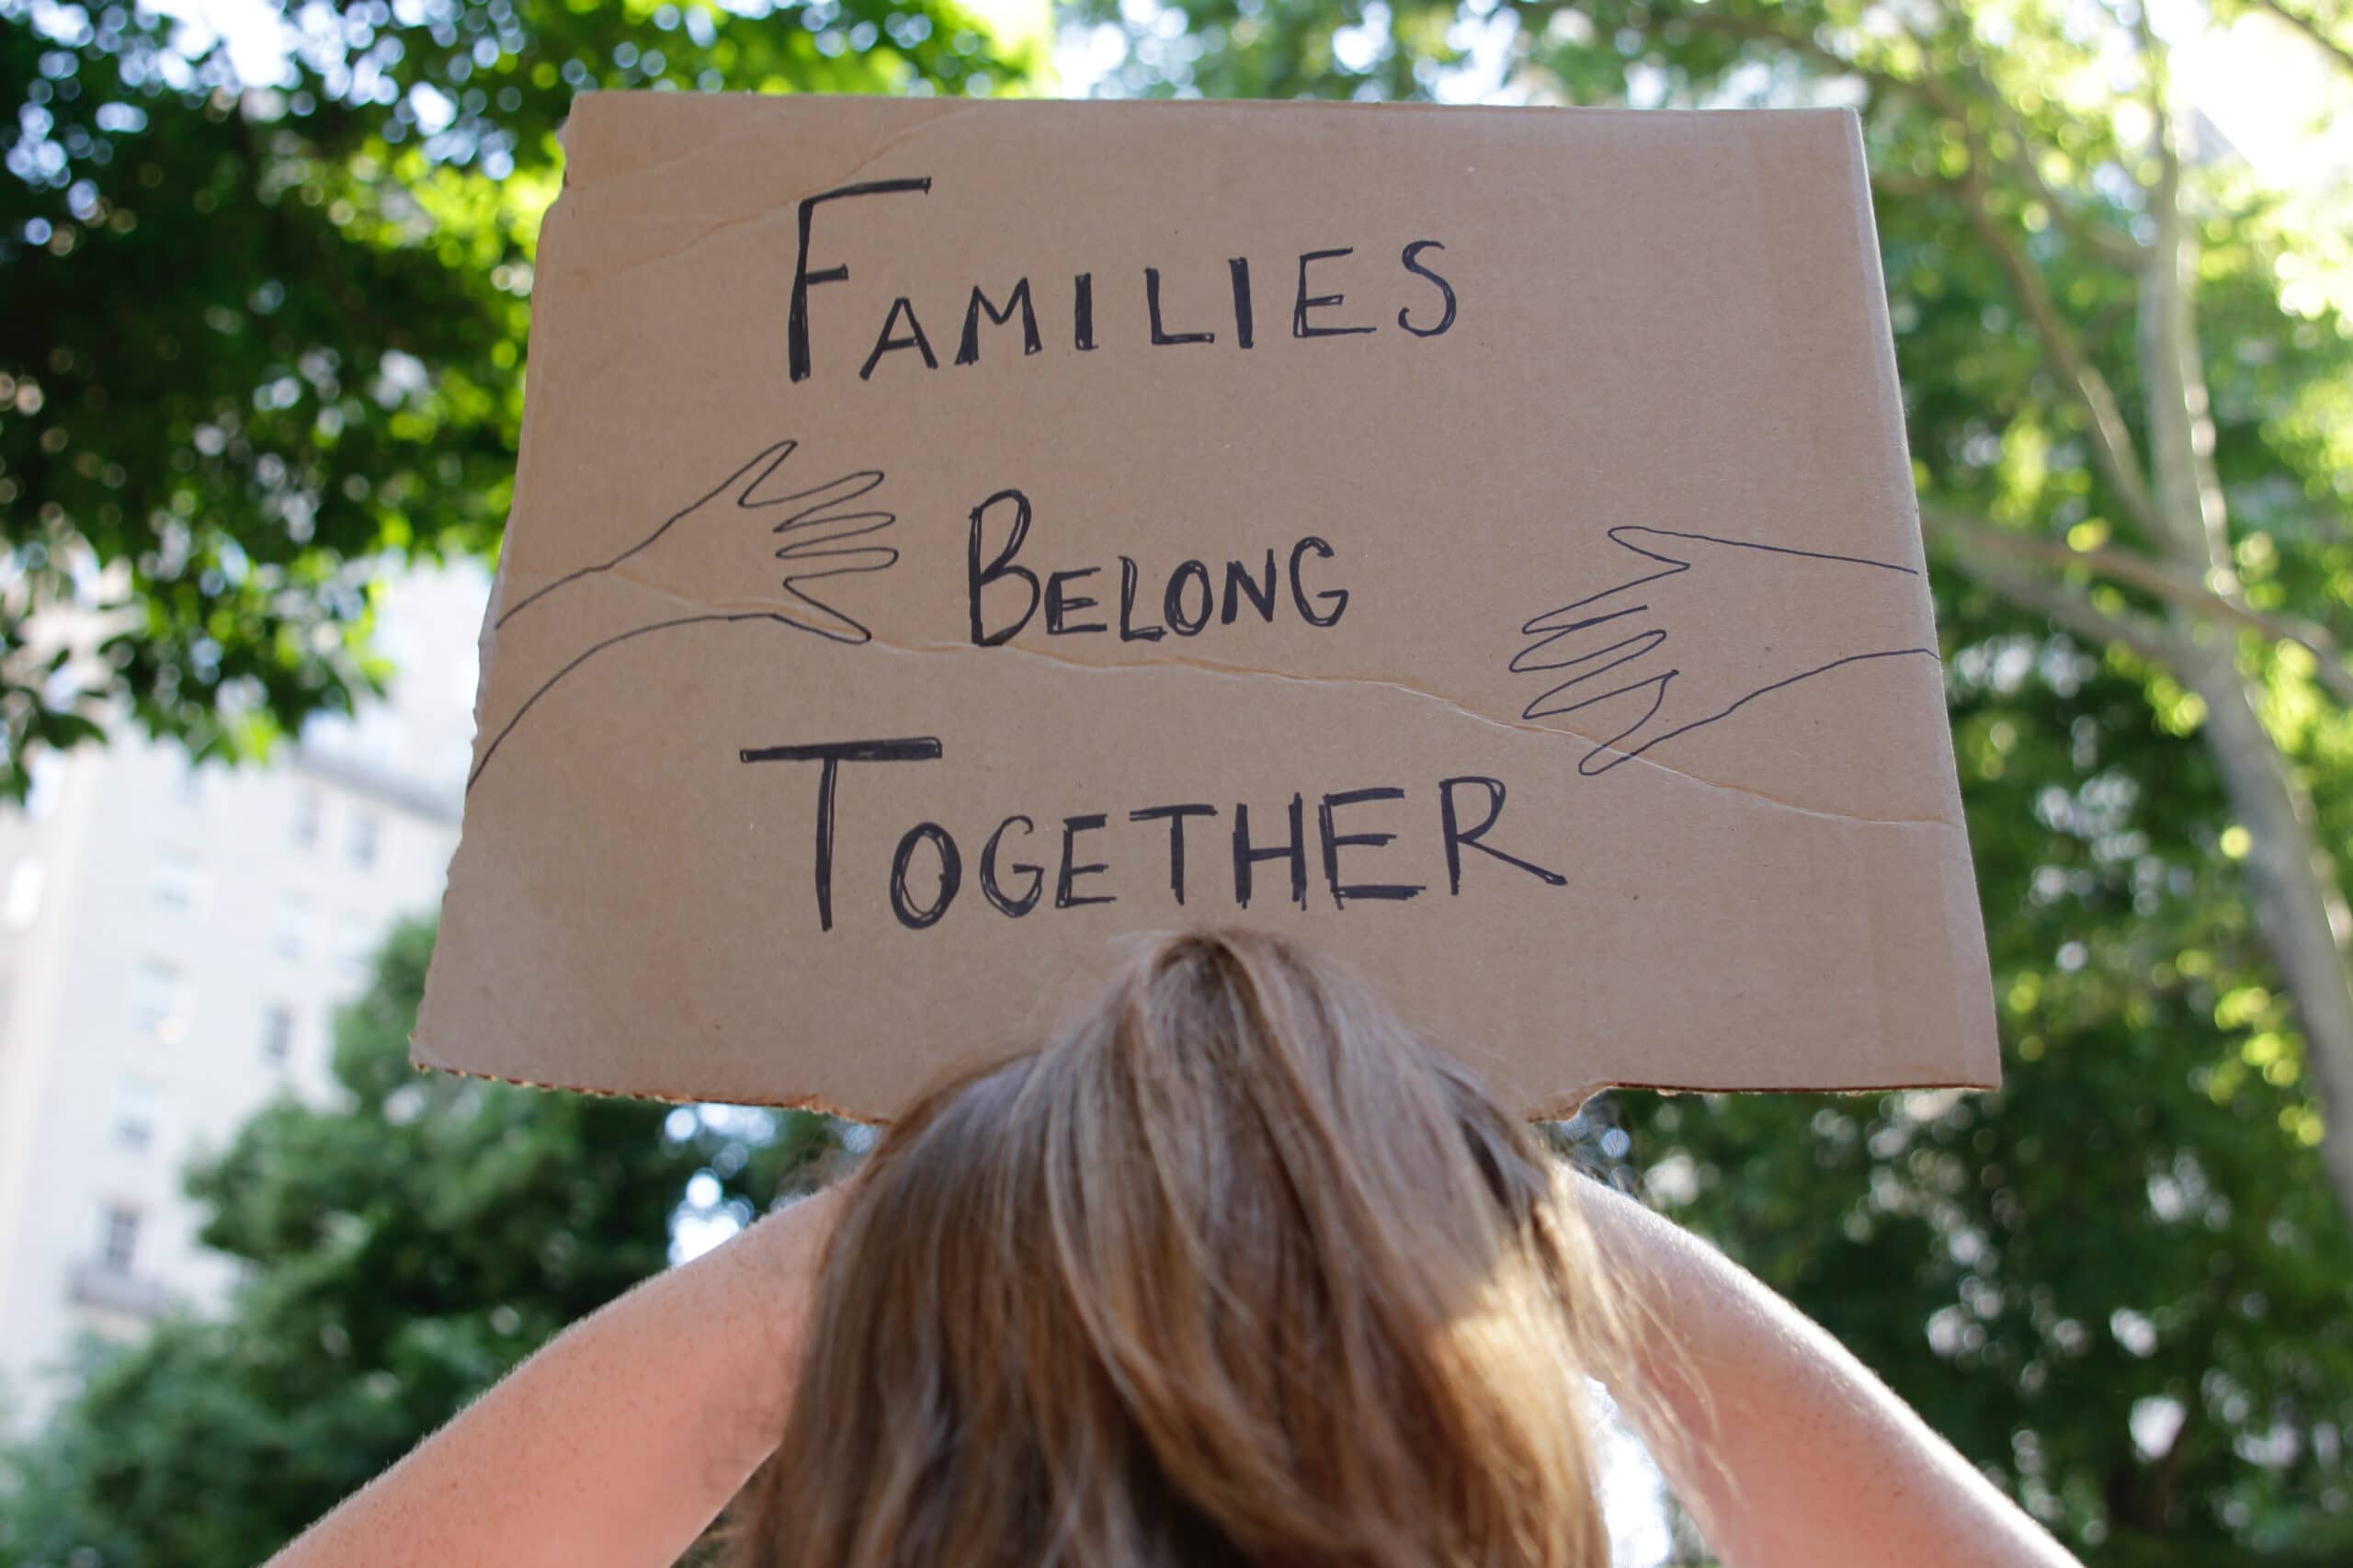 Two hands hold aa cardboard sign with the words "Families belong together" written on it in black.